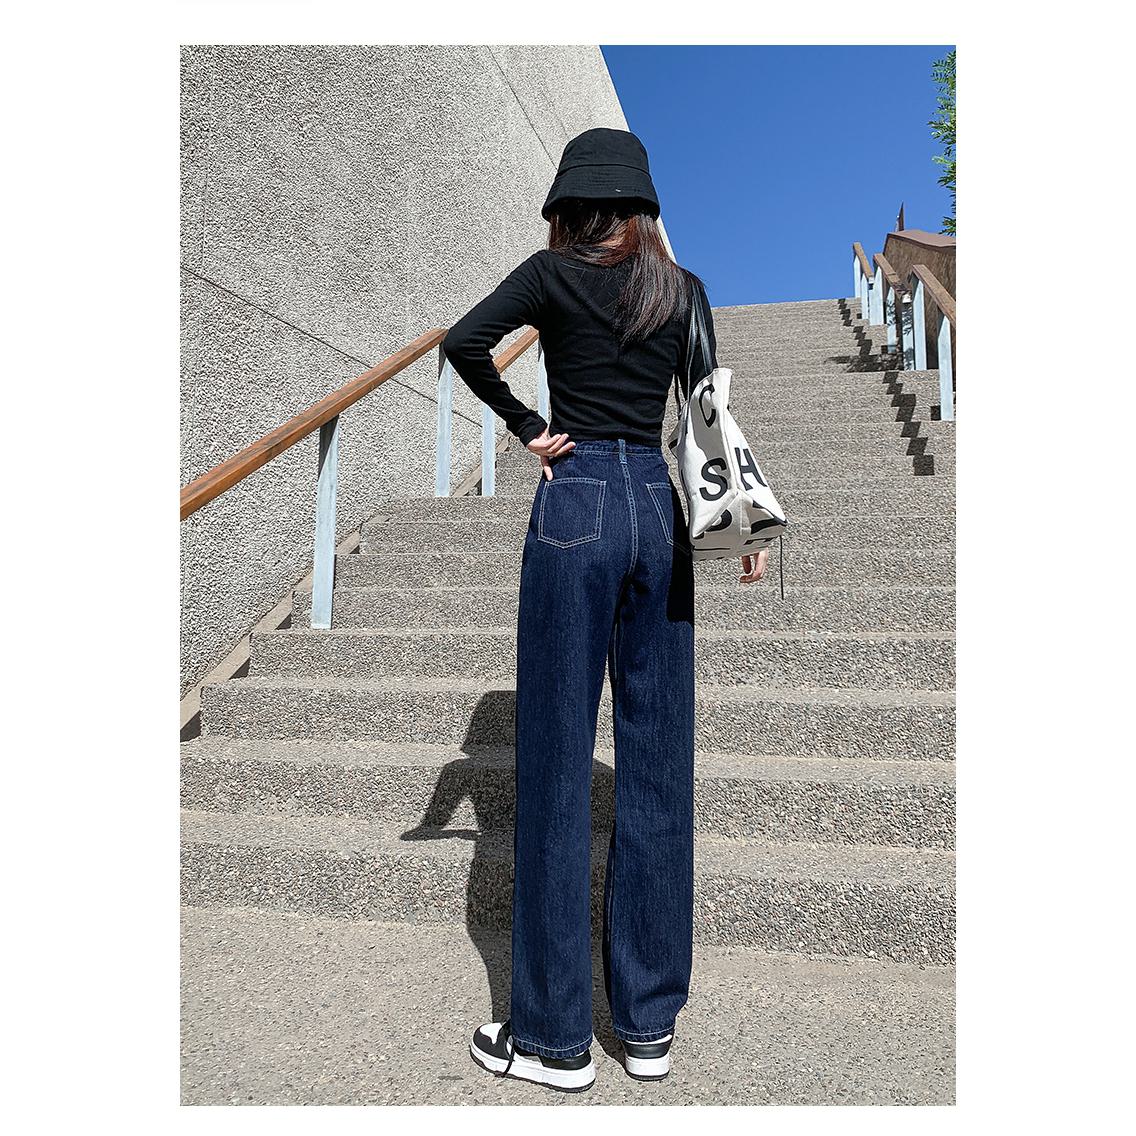 Dark-Colored Slimming High-Waisted Cropped & Regular & Long Straight Leg Jeans